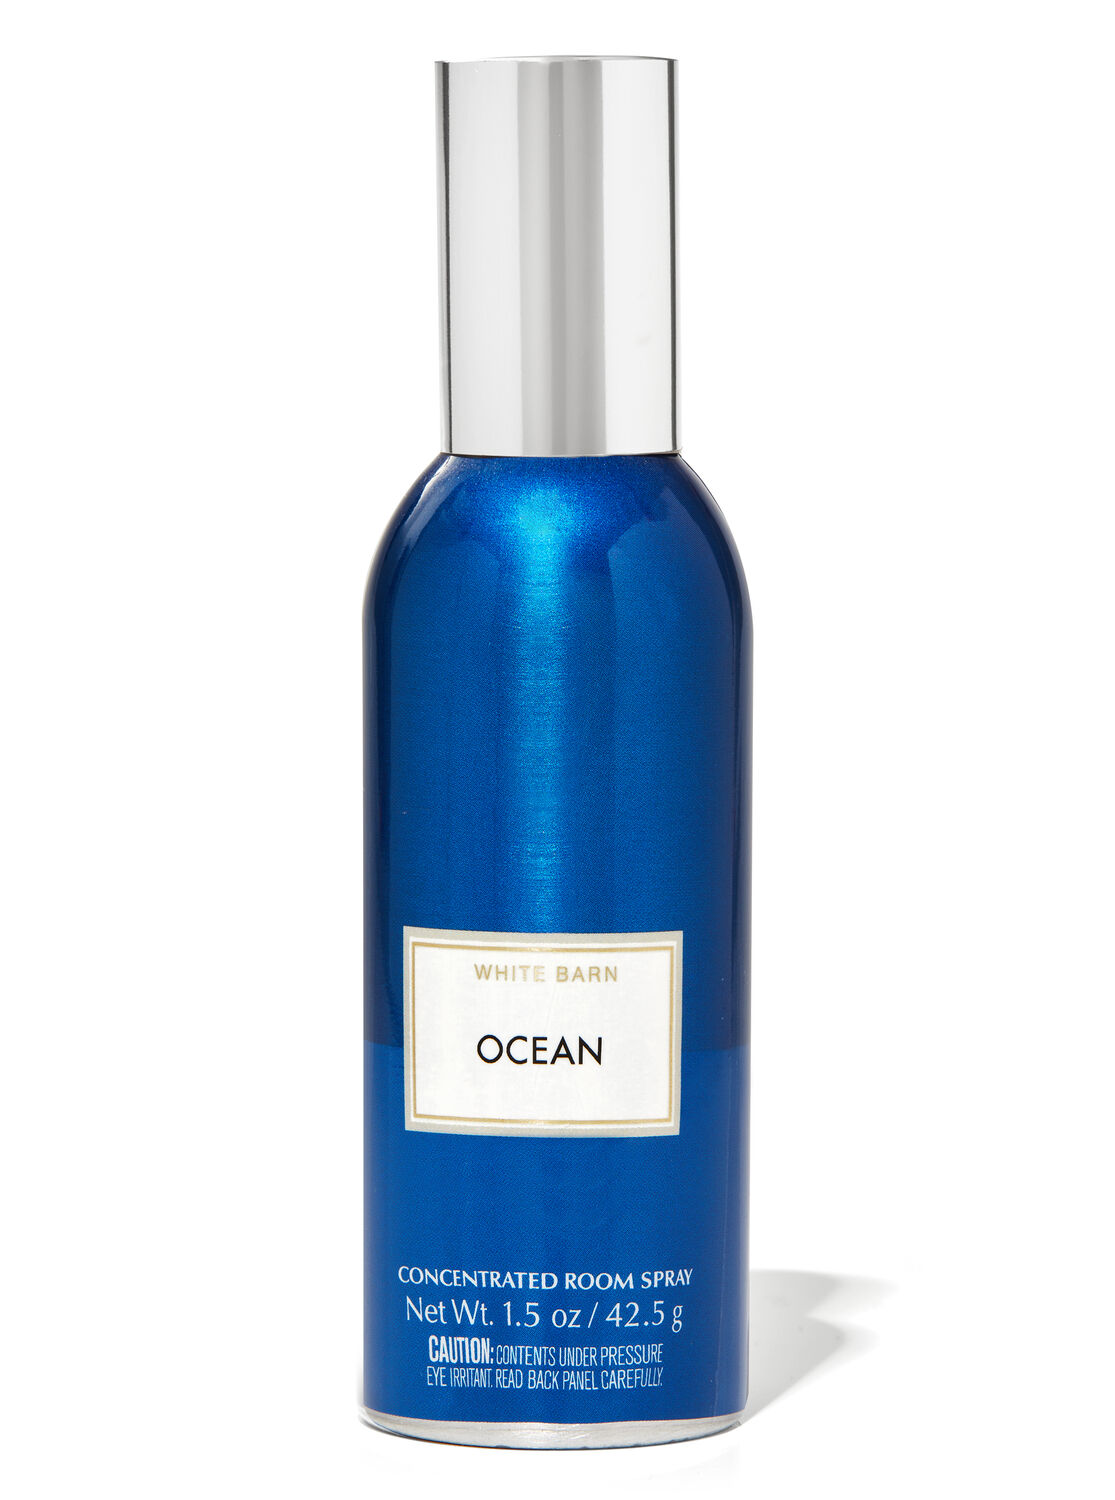 Ocean Concentrated Room Spray White Barn Bath Body Works